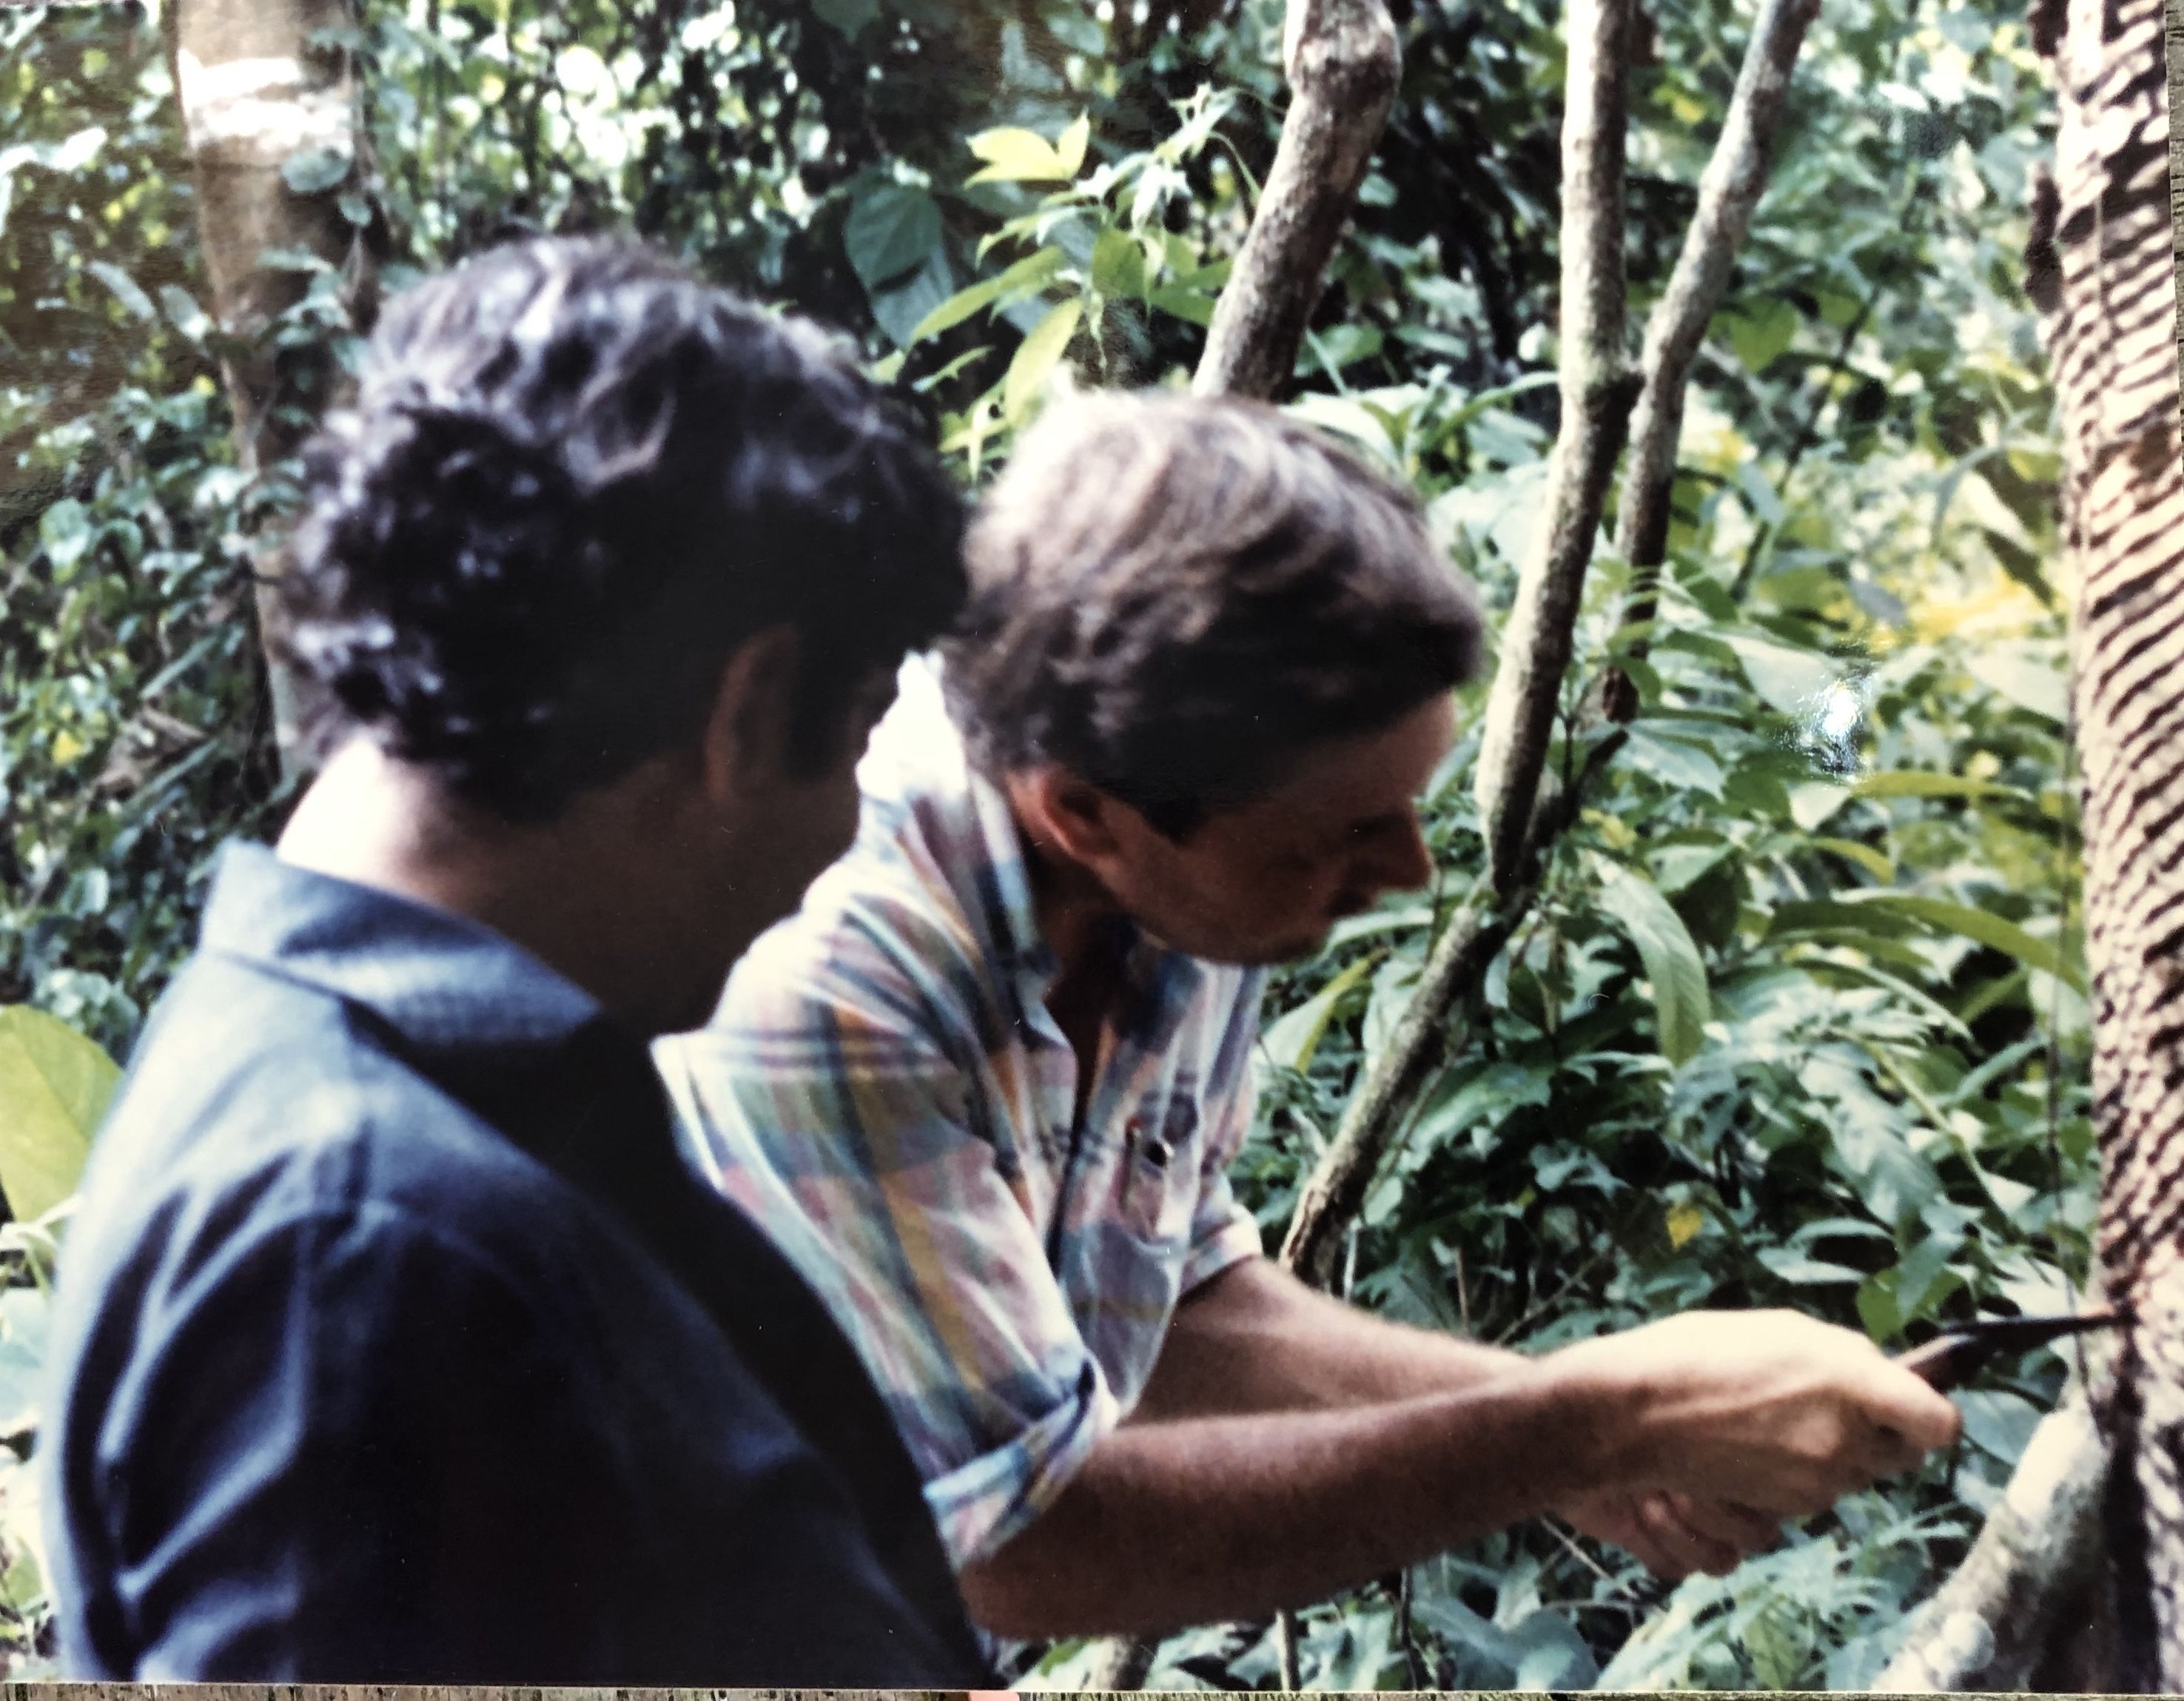 Pulitzer Executive Director Jon Sawyer (right) on a 1987 reporting trip, in the Amazon state of Acre, with rubber tapper/environmentalist Chico Mendes. Mendes was murdered a few months later. The Brazilian agency charged with protecting the Amazon is named for Mendes. The current government, led by President Jair Bolsenaro, is pressing to undo the environmental regulations that were a key legacy of Chico Mendes. Image by Kem Knapp Sawyer. Brazil, 1987. 